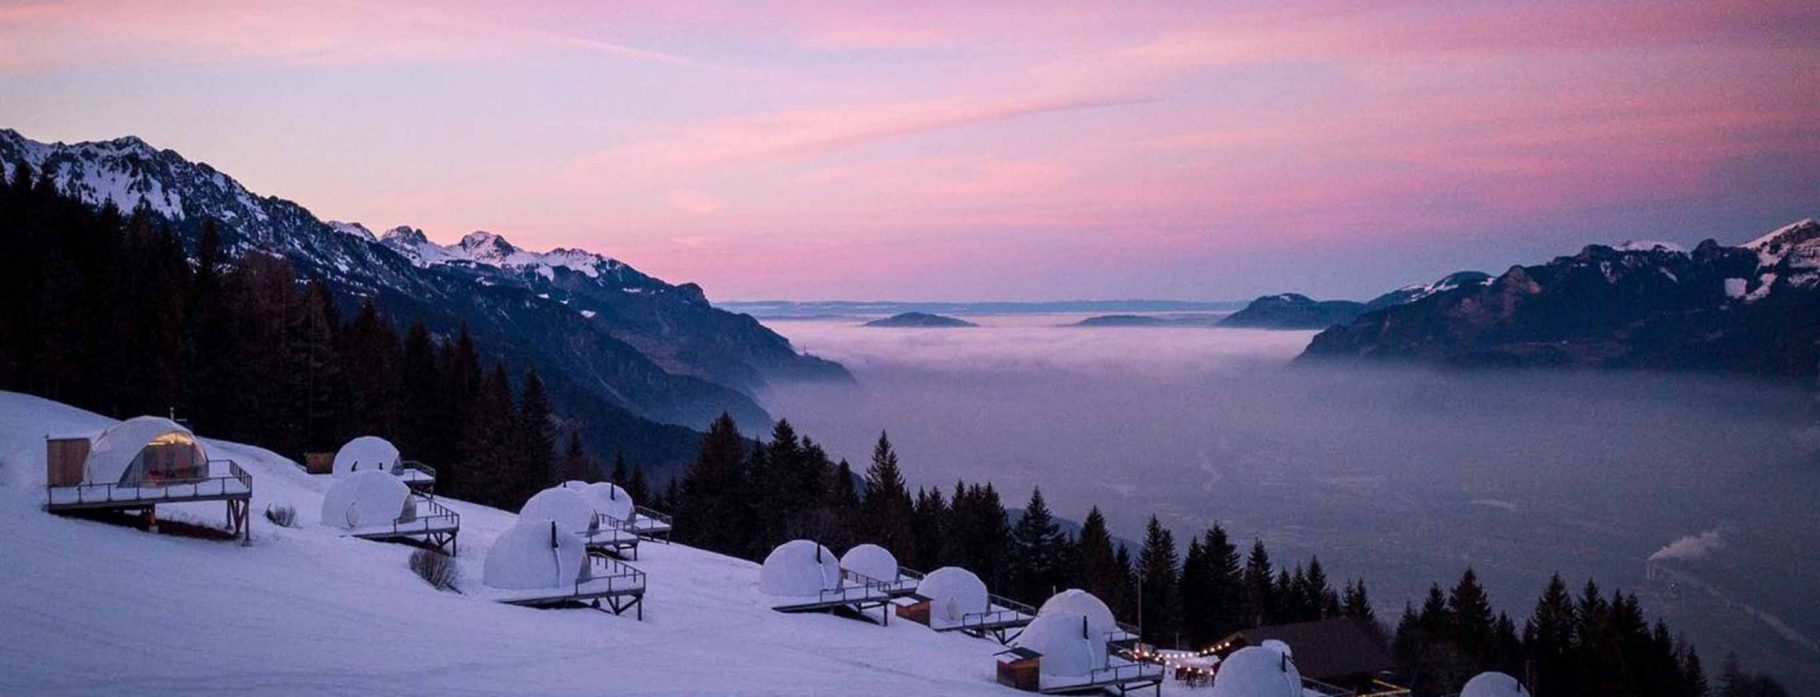 8 Days Wintry Switzerland – From City To Mountain